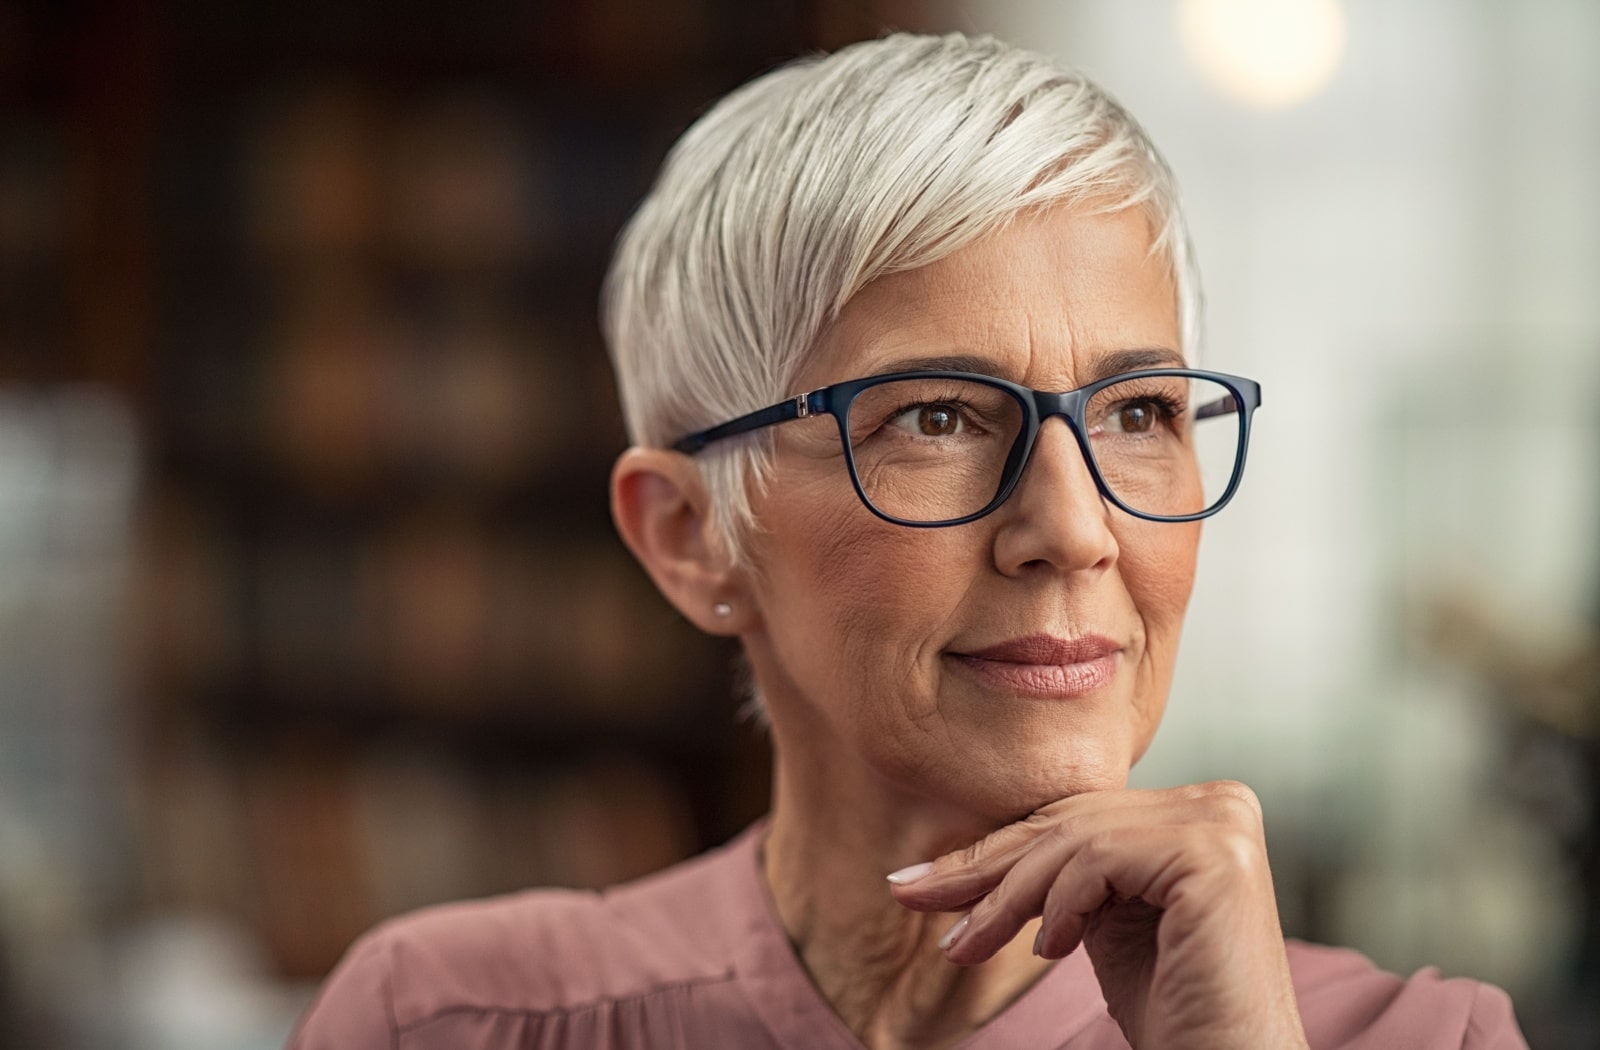 An older adult woman with gray hair, thinking and wearing eyeglasses.